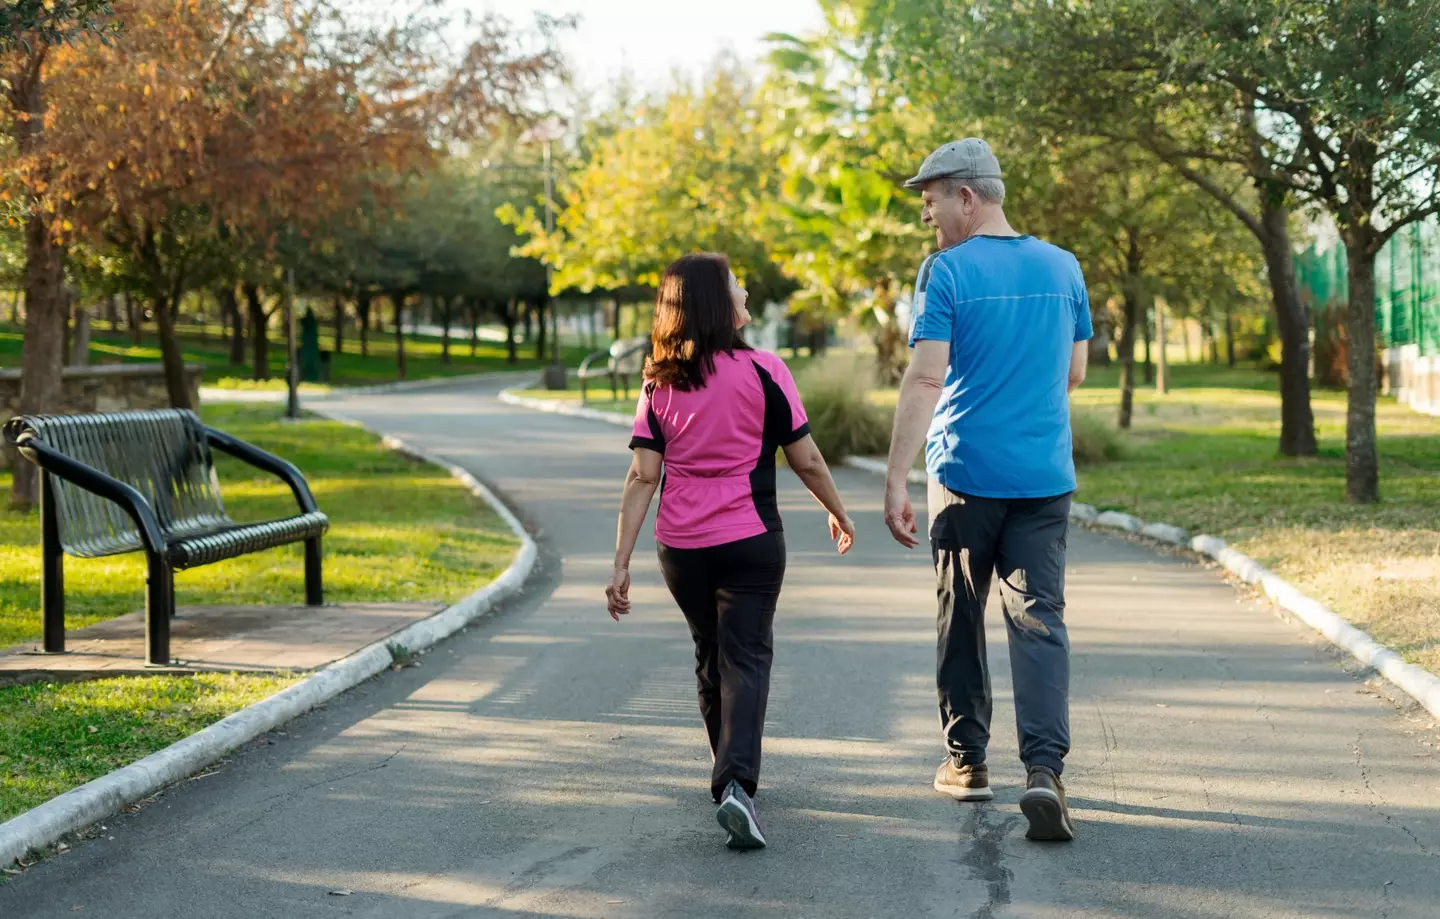 Walking 5,000 steps three times a week can boost your life expectancy.